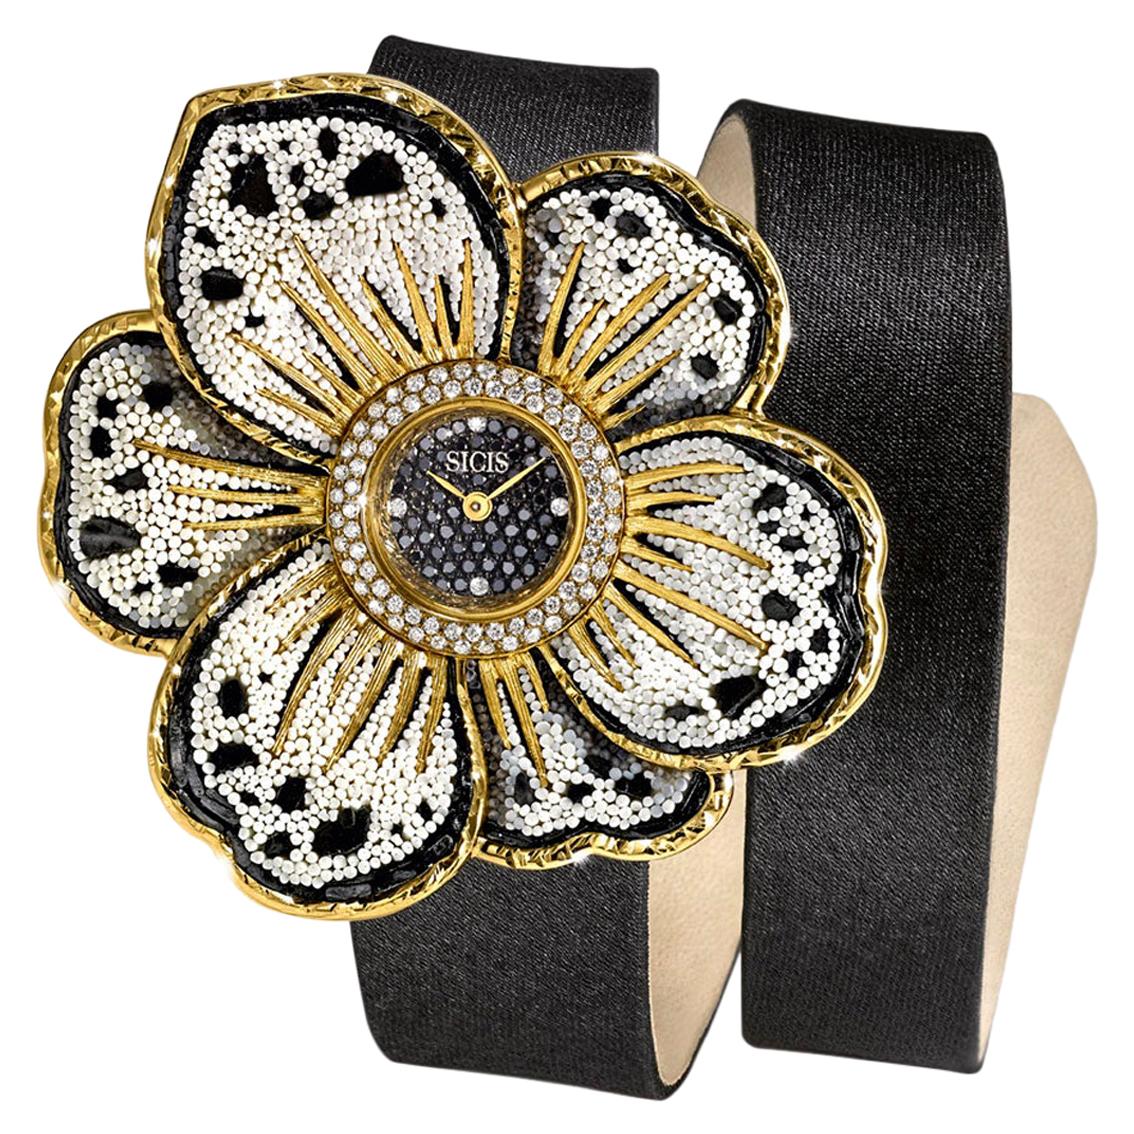 Watch Gold White and Black Diamonds Satin Strap Hand Decorated with Micromosaic